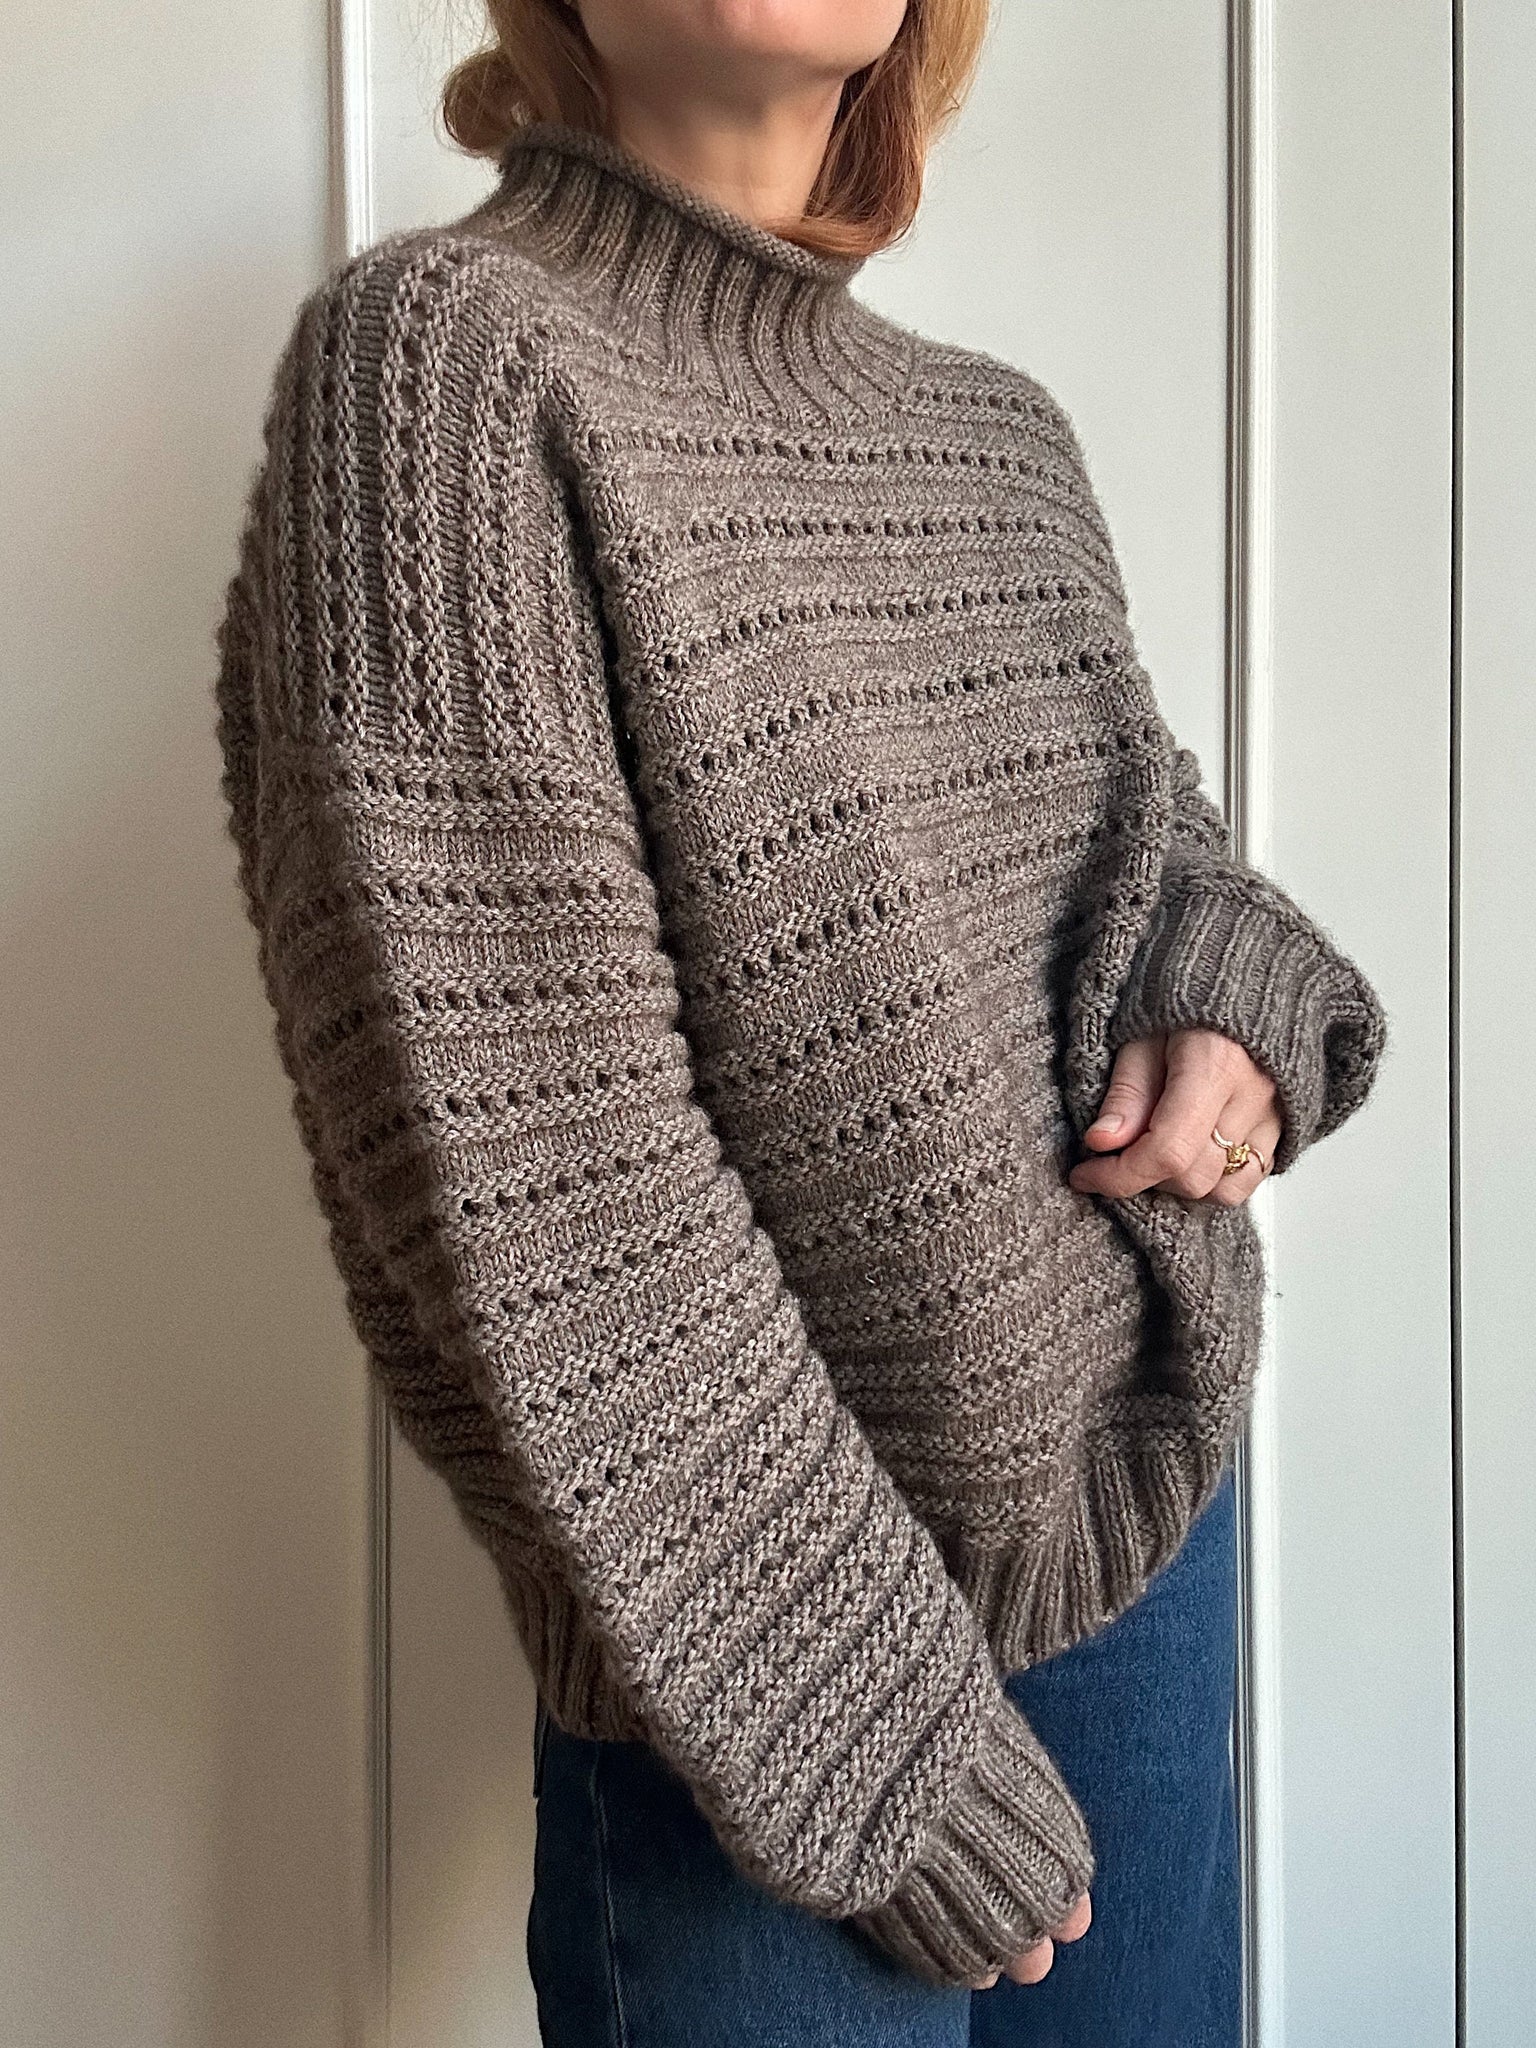 Sweater No. 27 - Knitting Pattern in English – • MY FAVOURITE THINGS ...